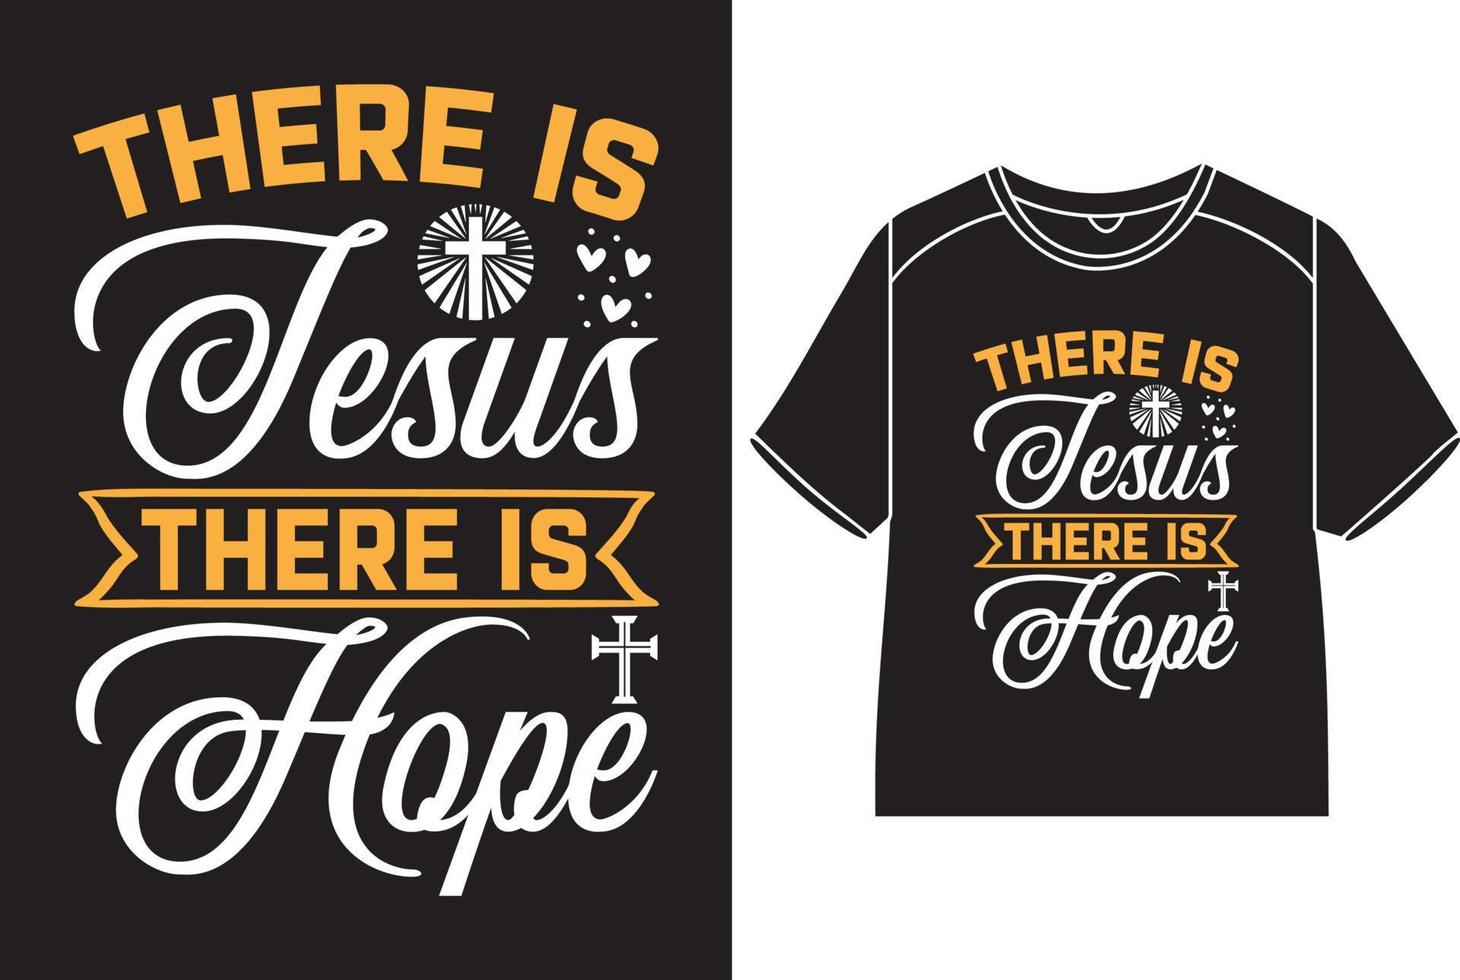 There is Jesus there is hope T-Shirt Design vector